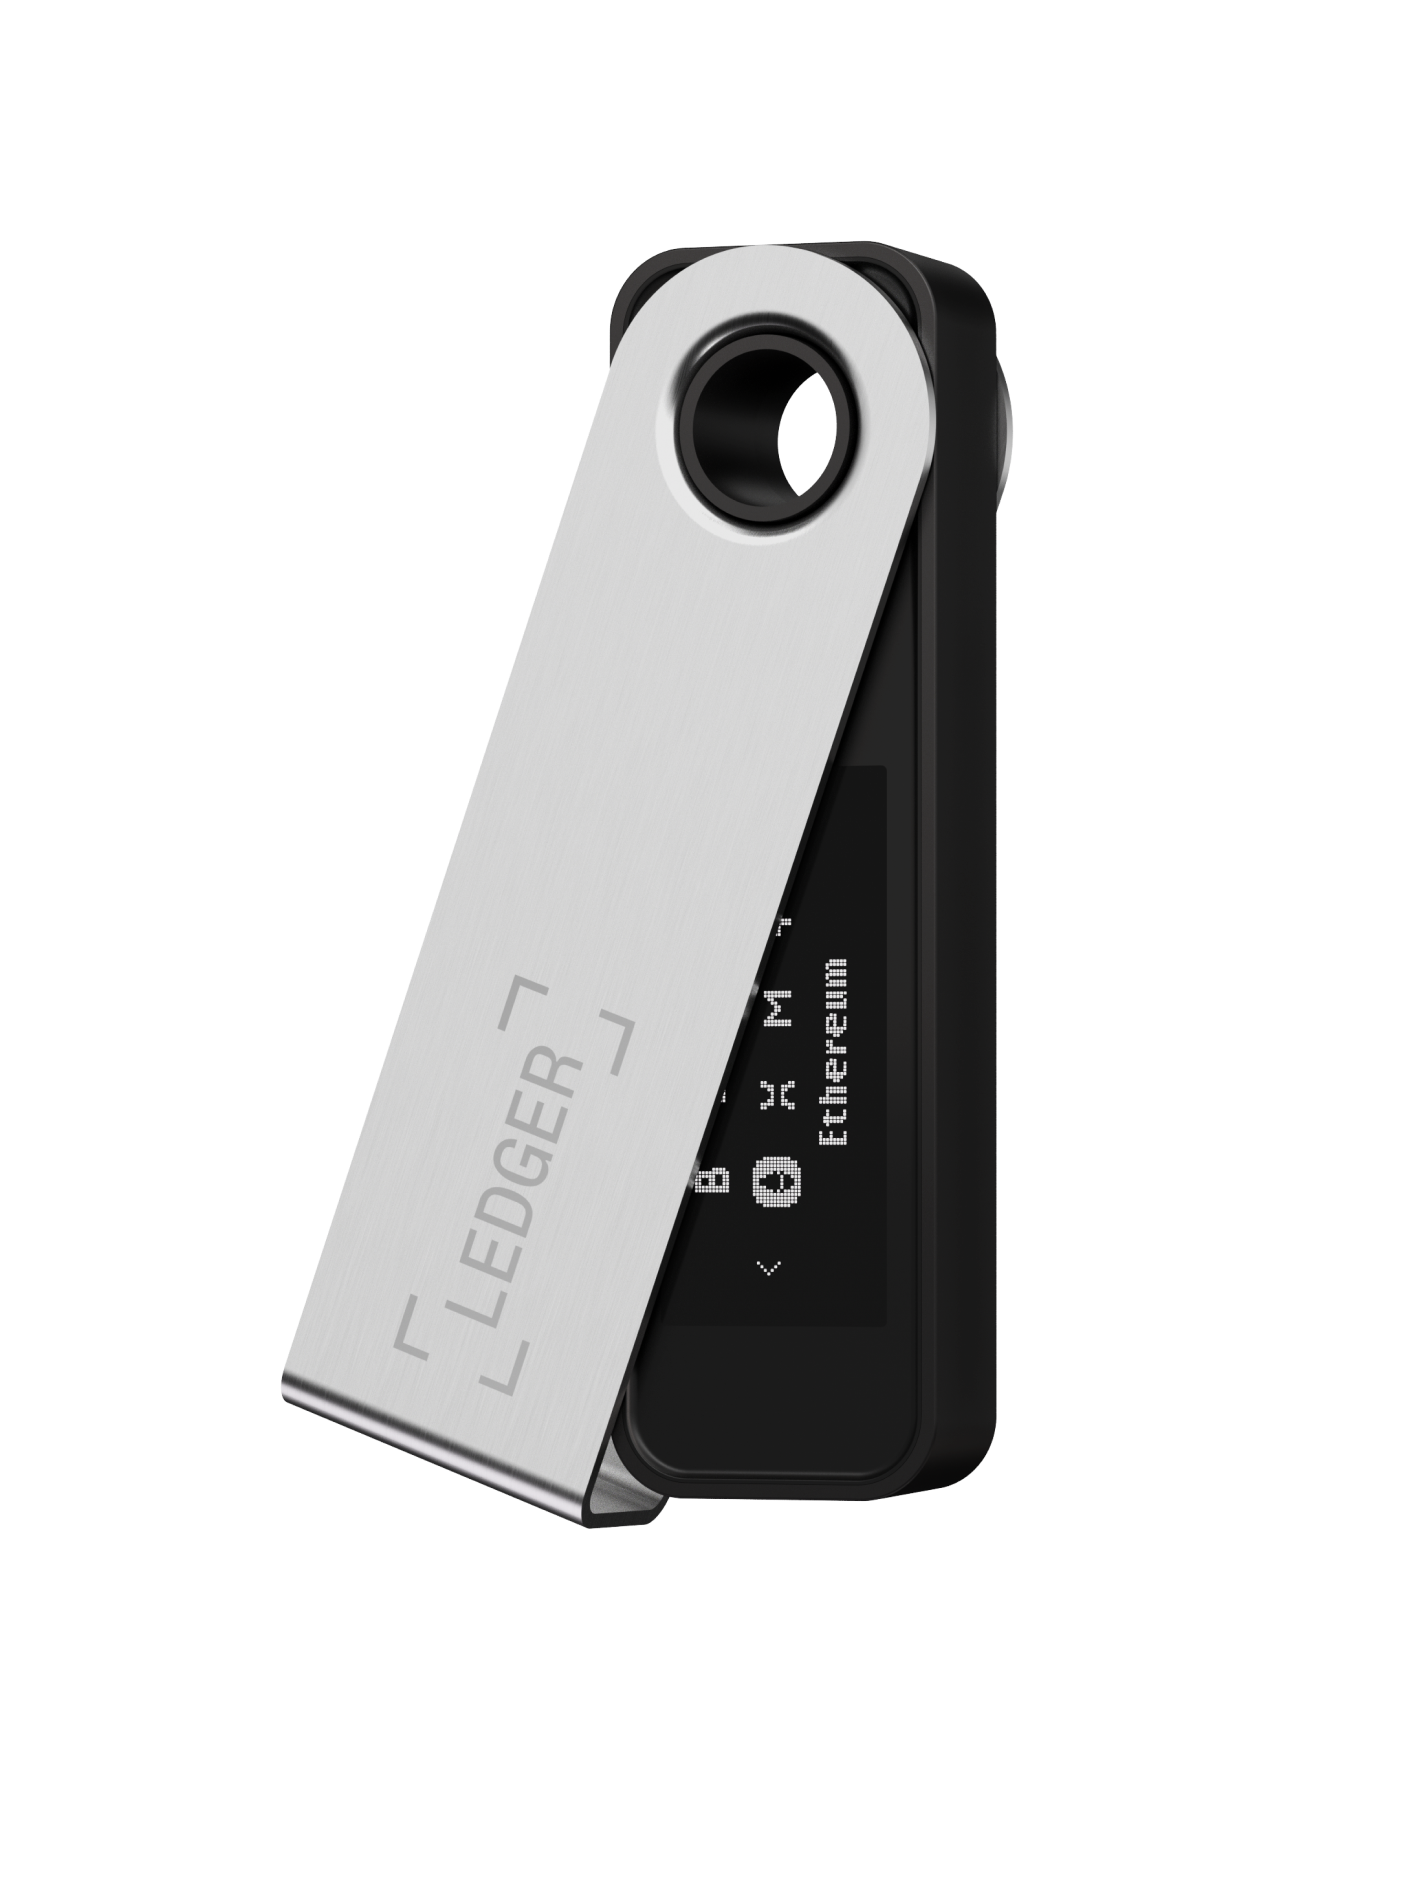 Ledger - Home of the first and only certified Hardware wallets